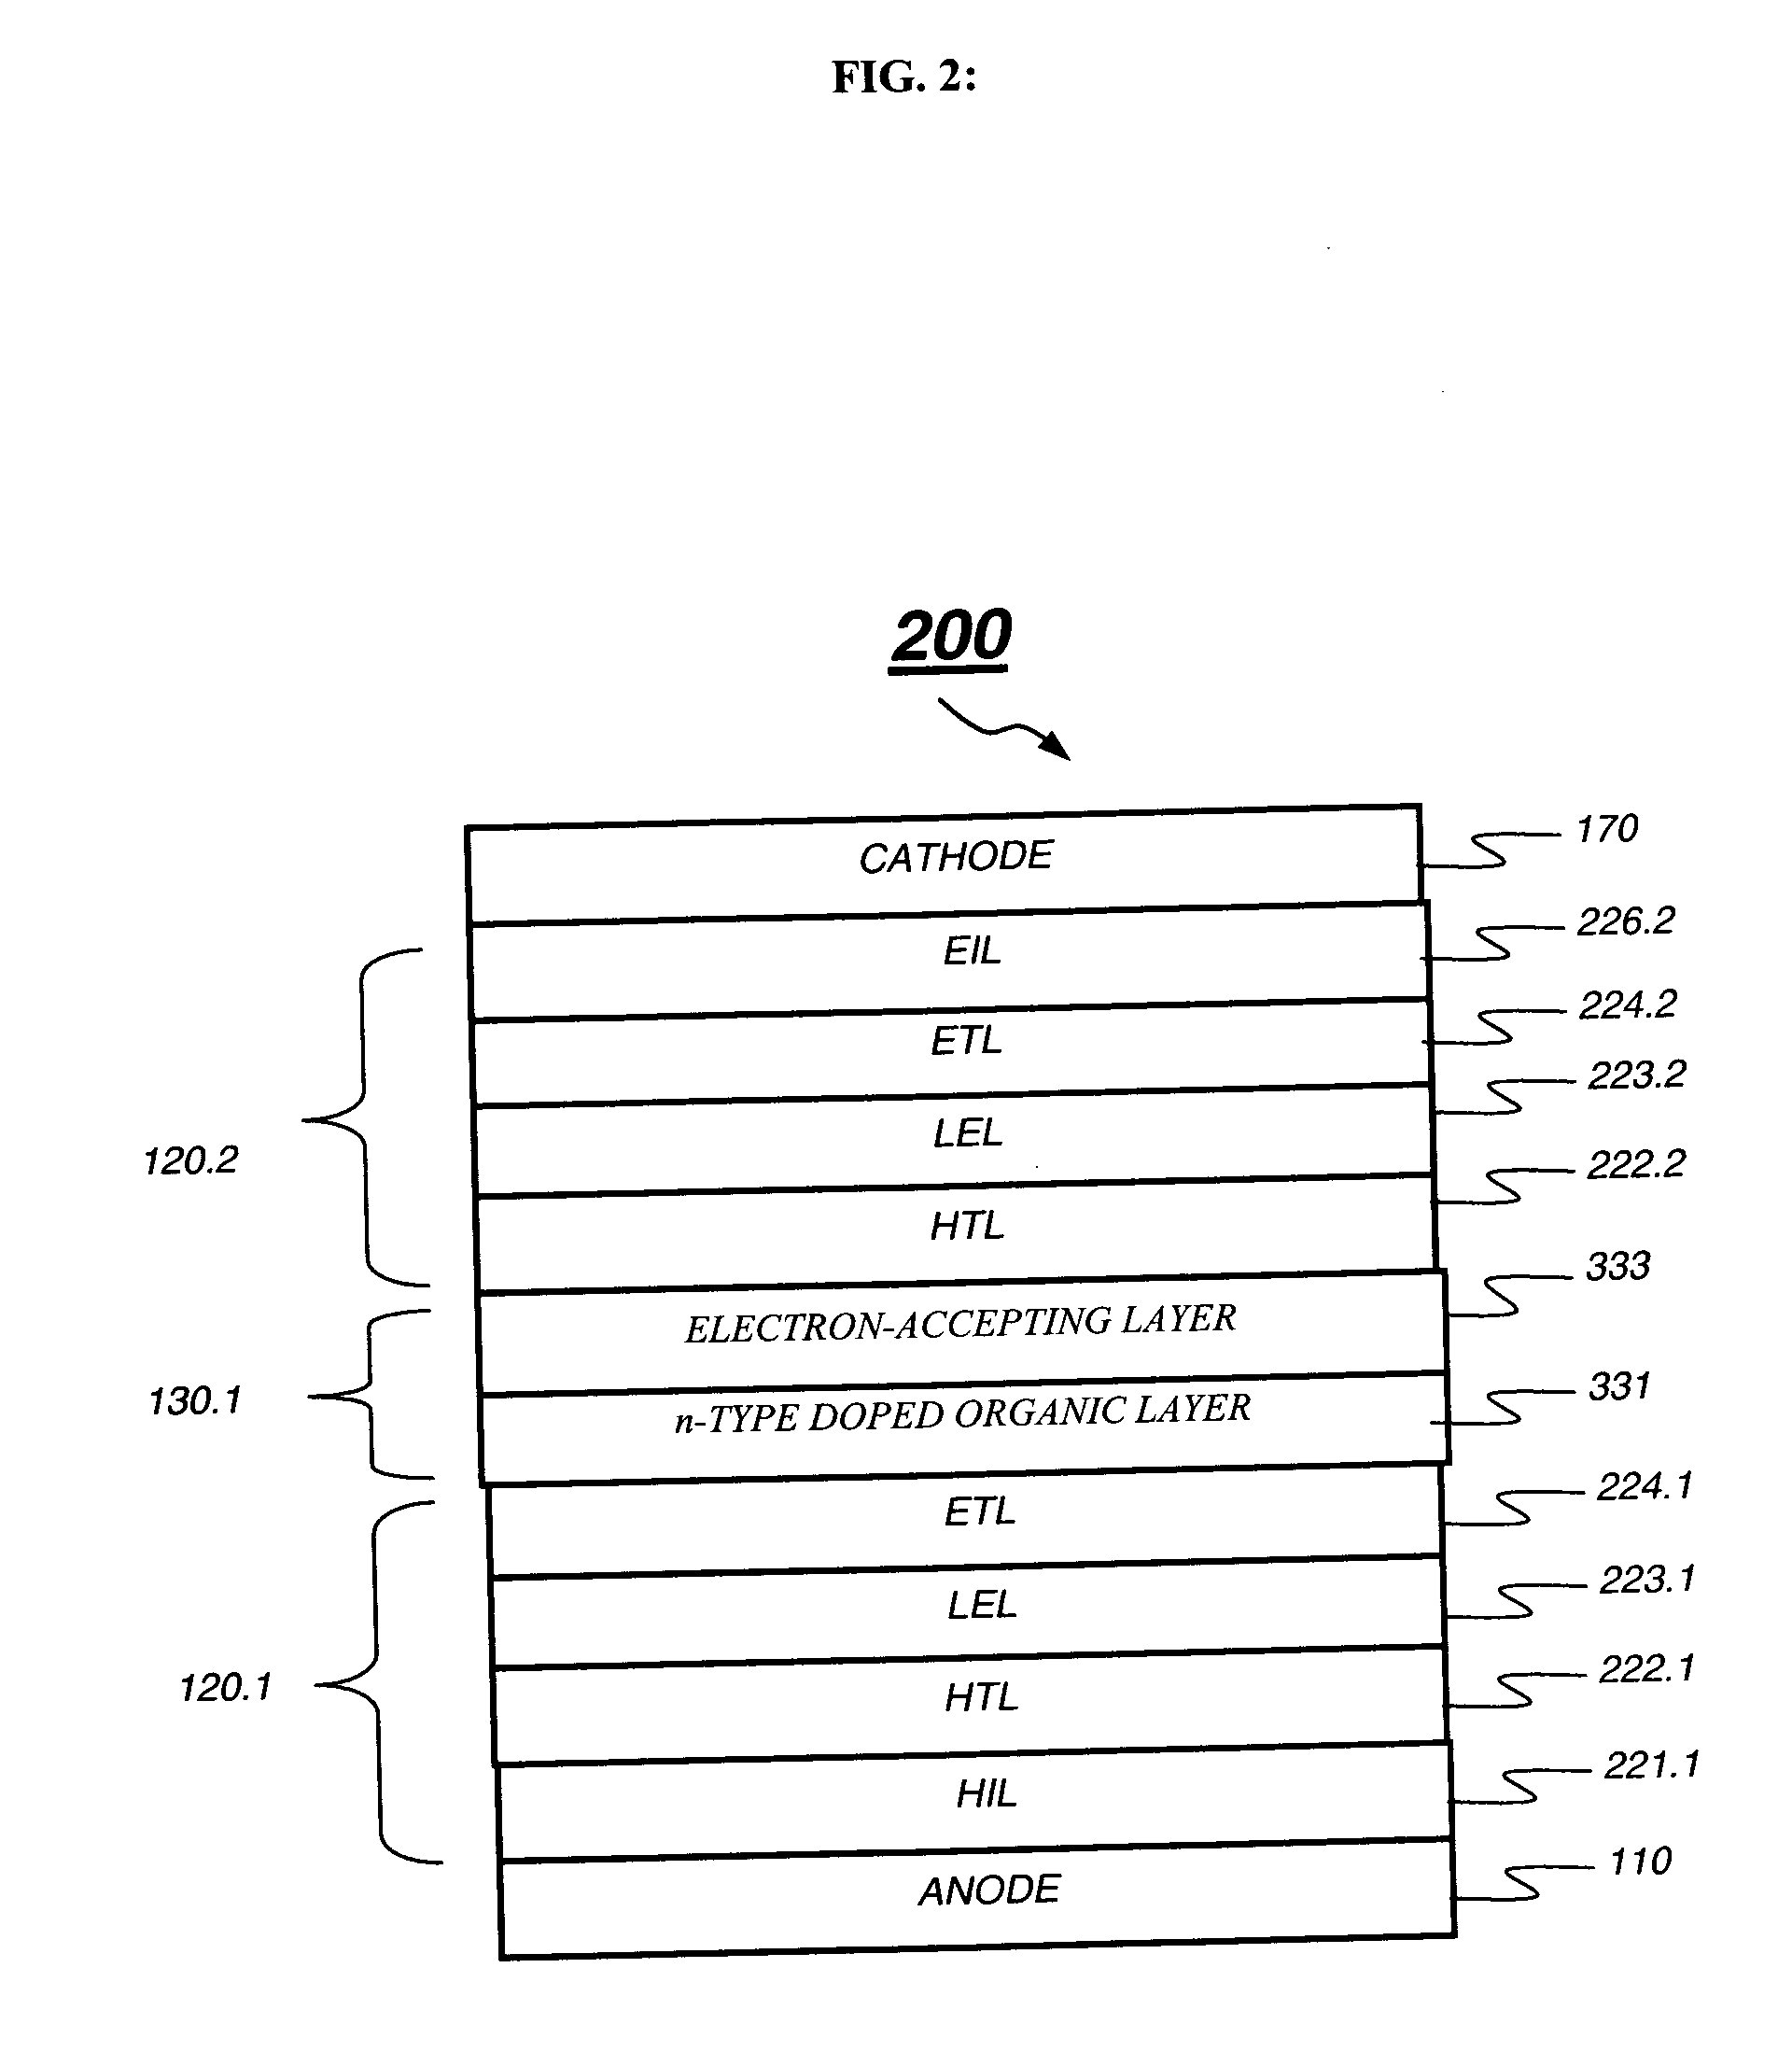 Intermediate connector for a tandem OLED device